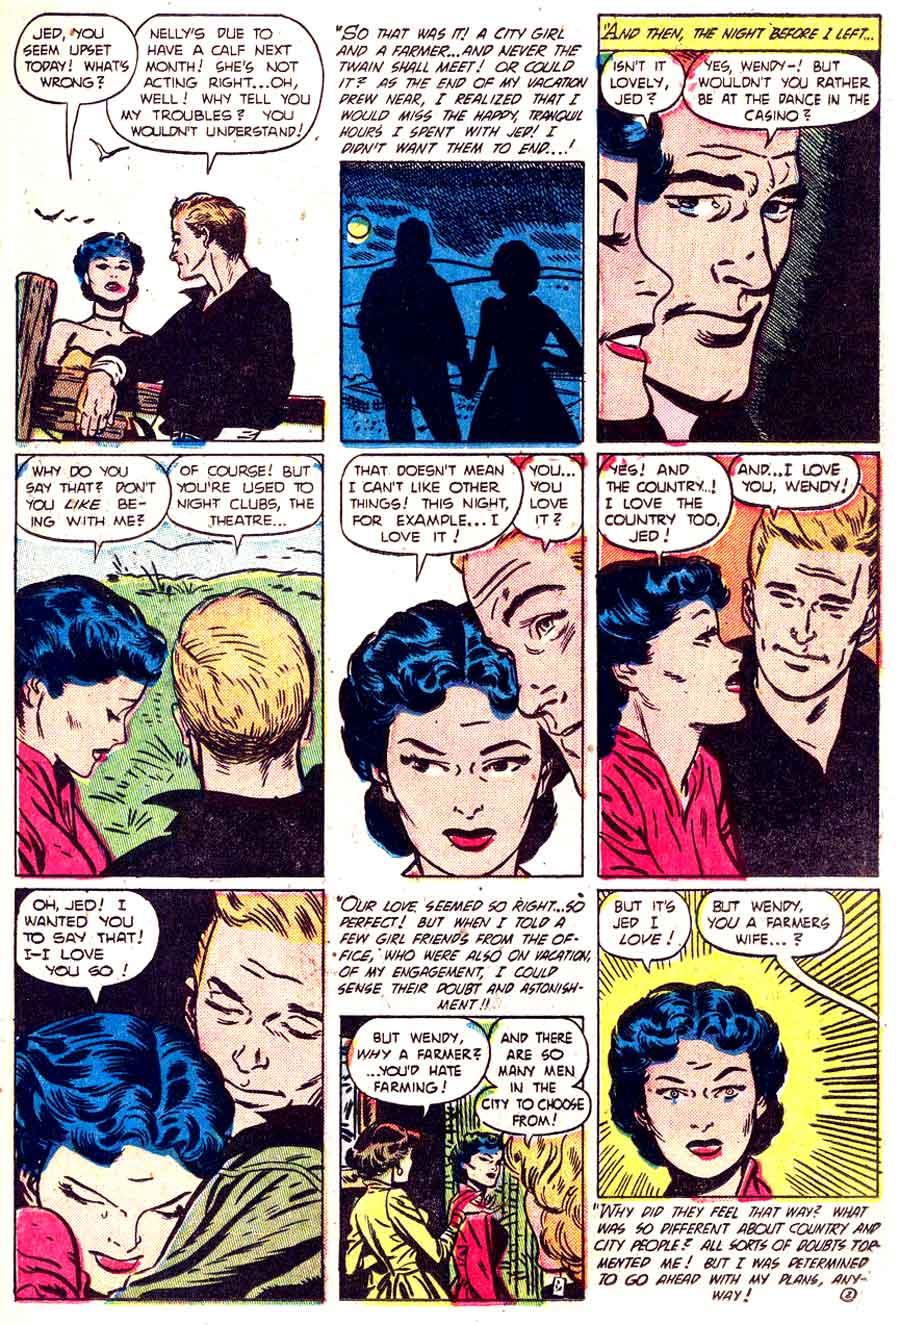 My Real Love v1 #5 standard romance comic book page art by Alex Toth